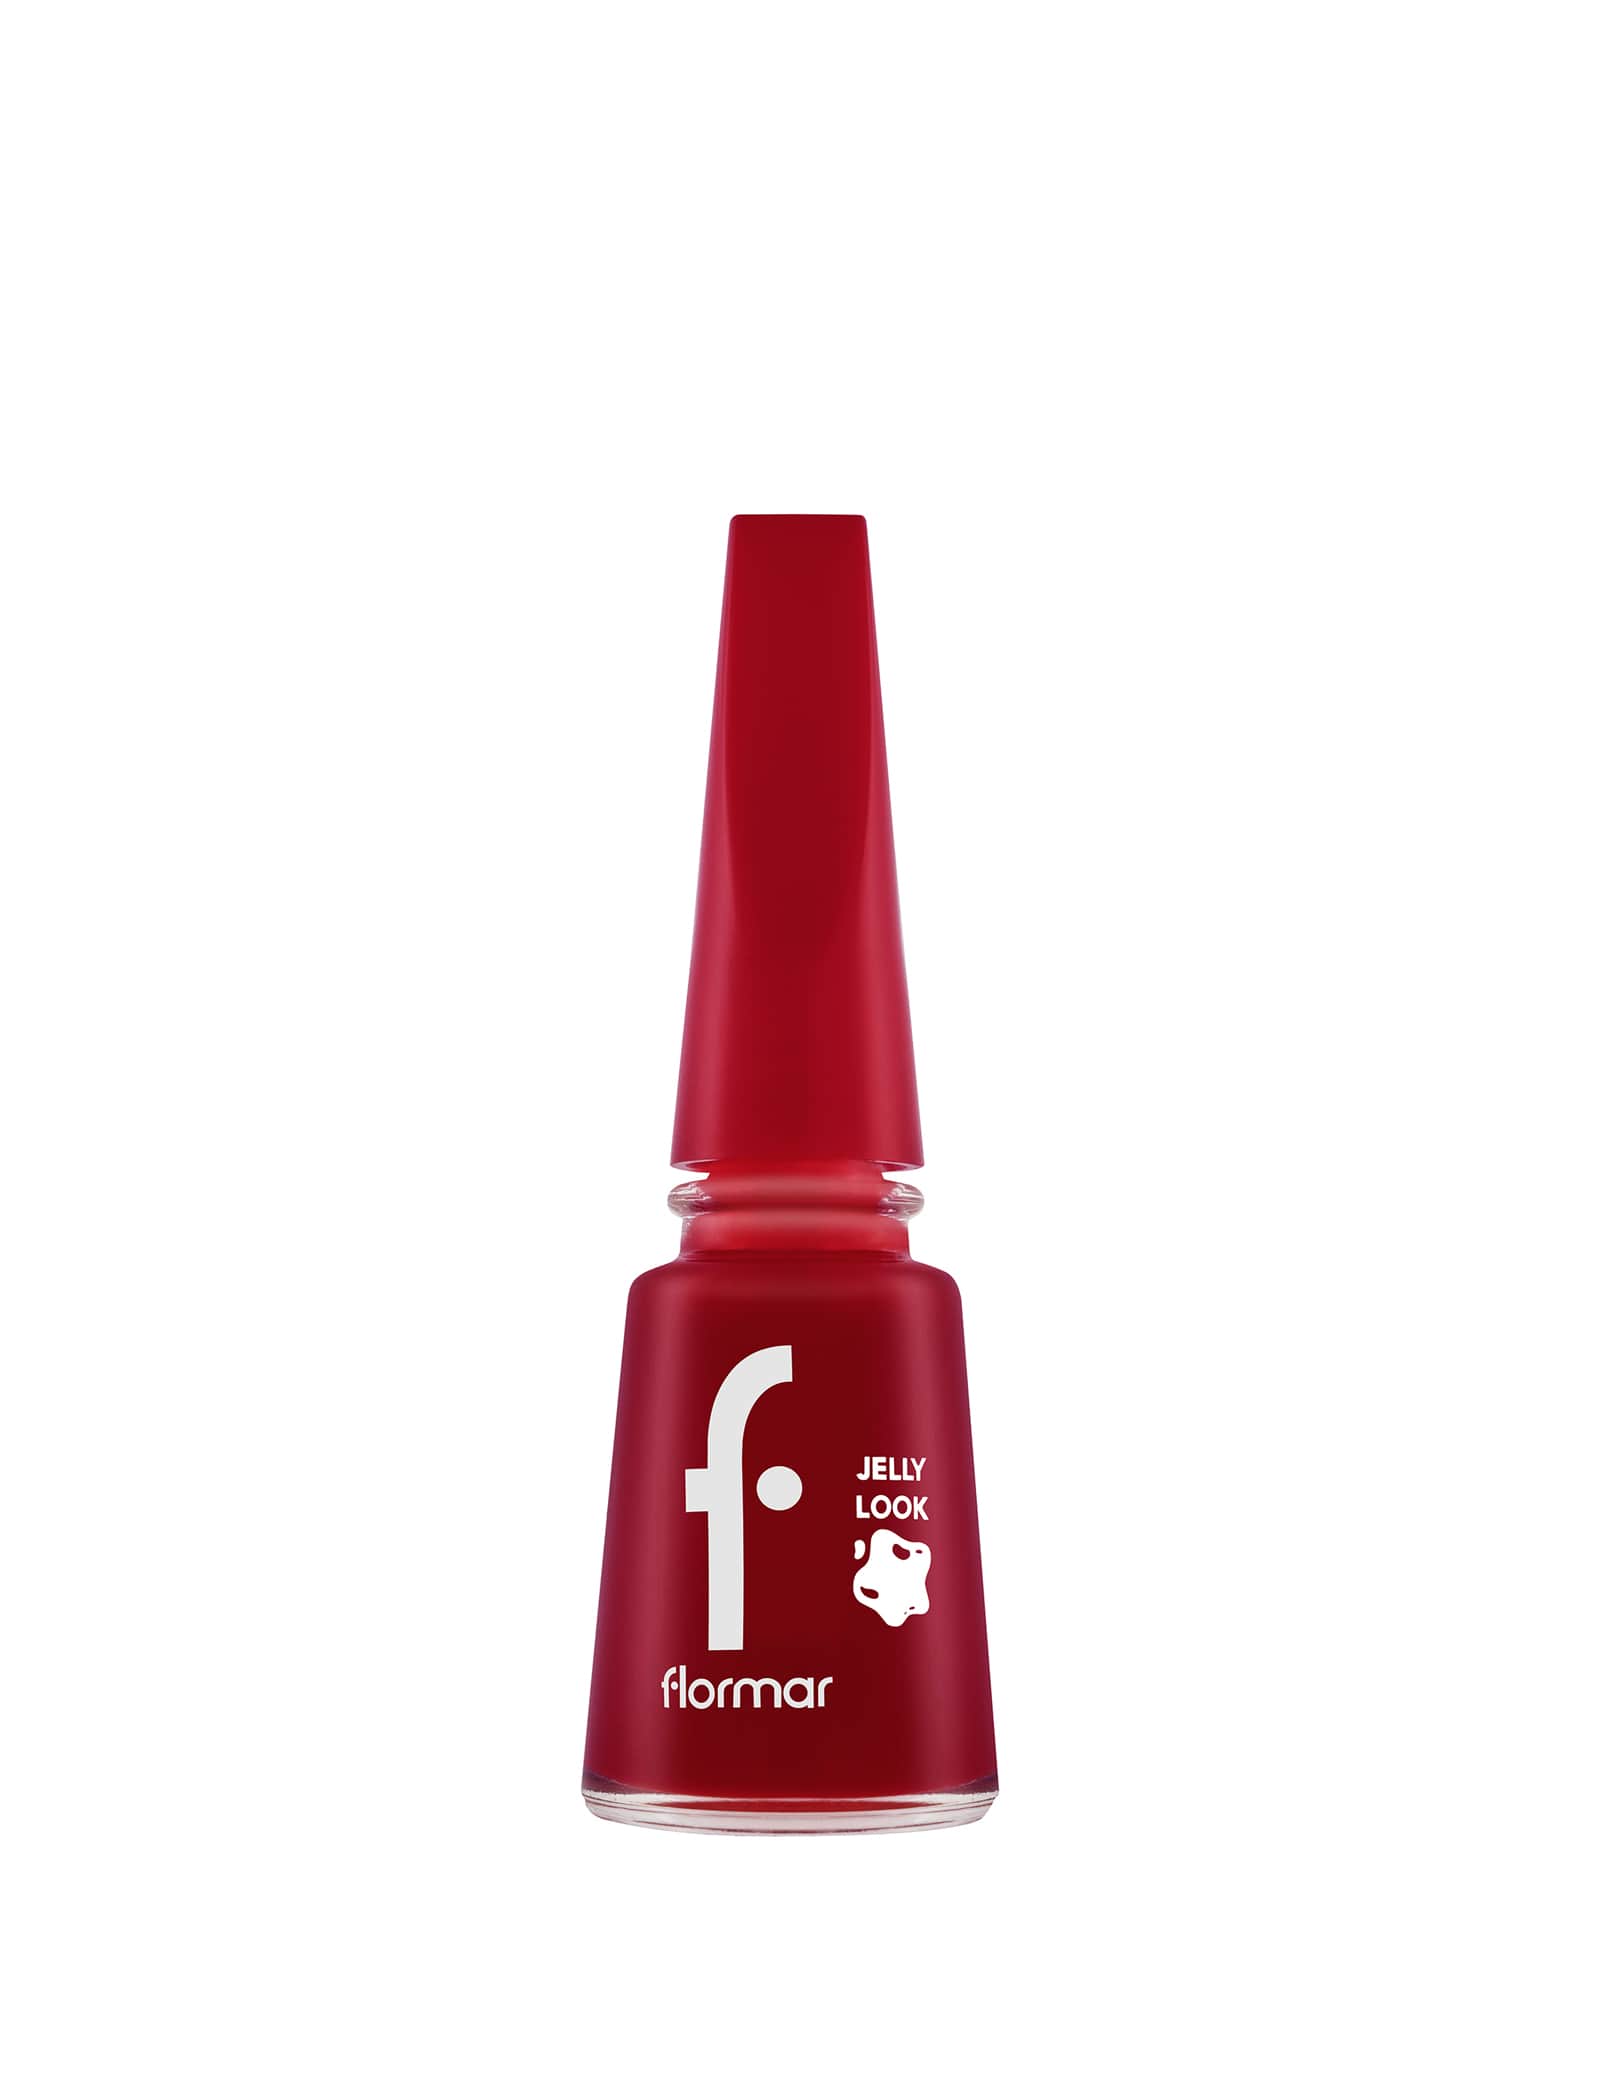 JELLY LOOK NAIL ENAMEL - JL23 Stunning Red